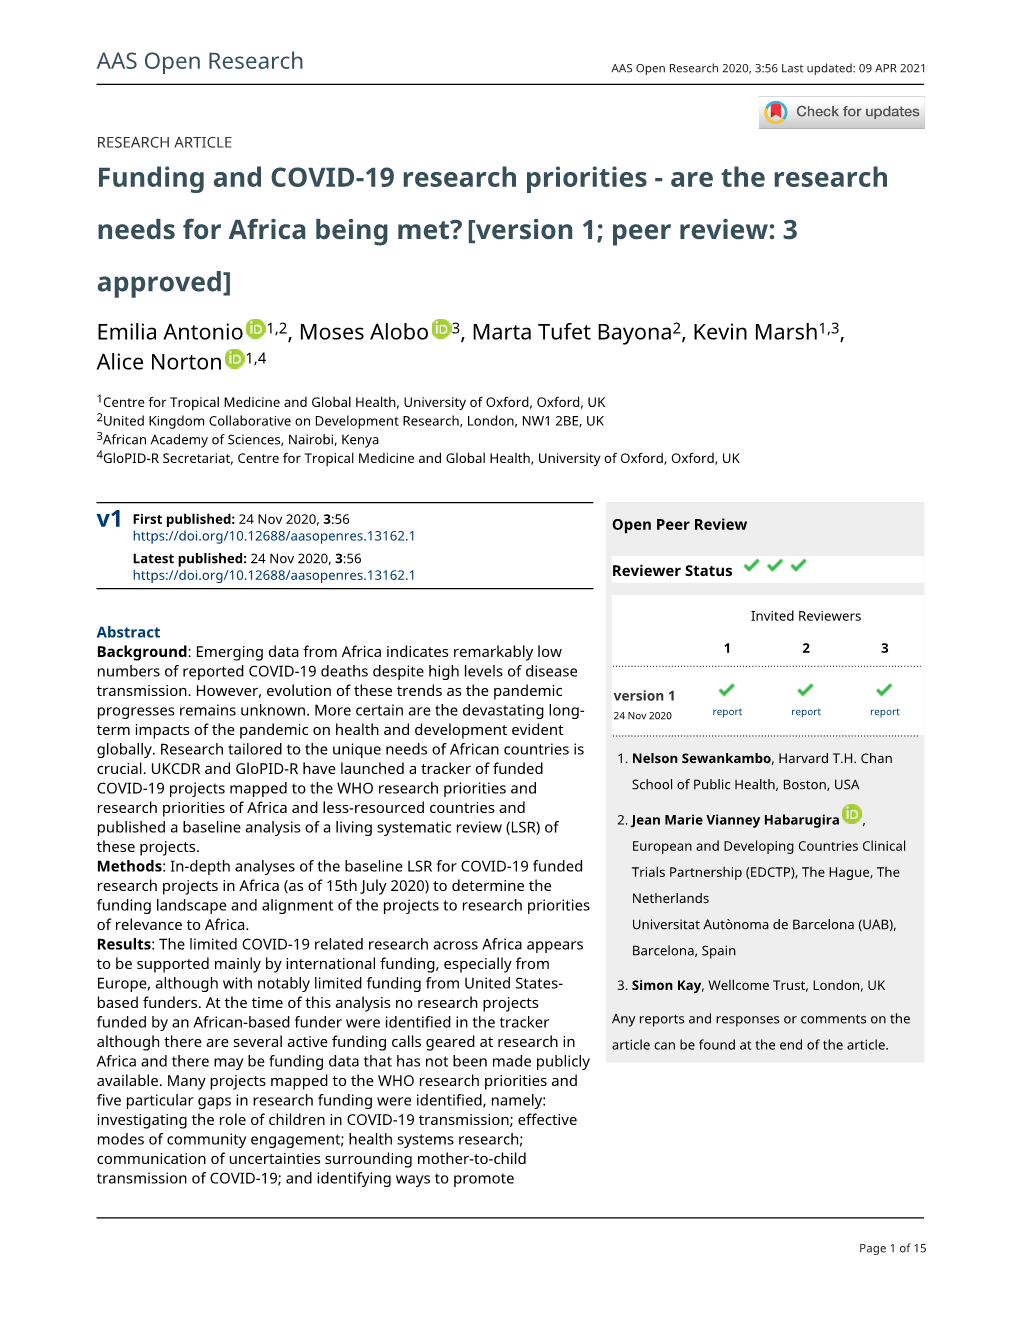 Funding and COVID-19 Research Priorities - Are the Research Needs for Africa Being Met? [Version 1; Peer Review: 3 Approved]